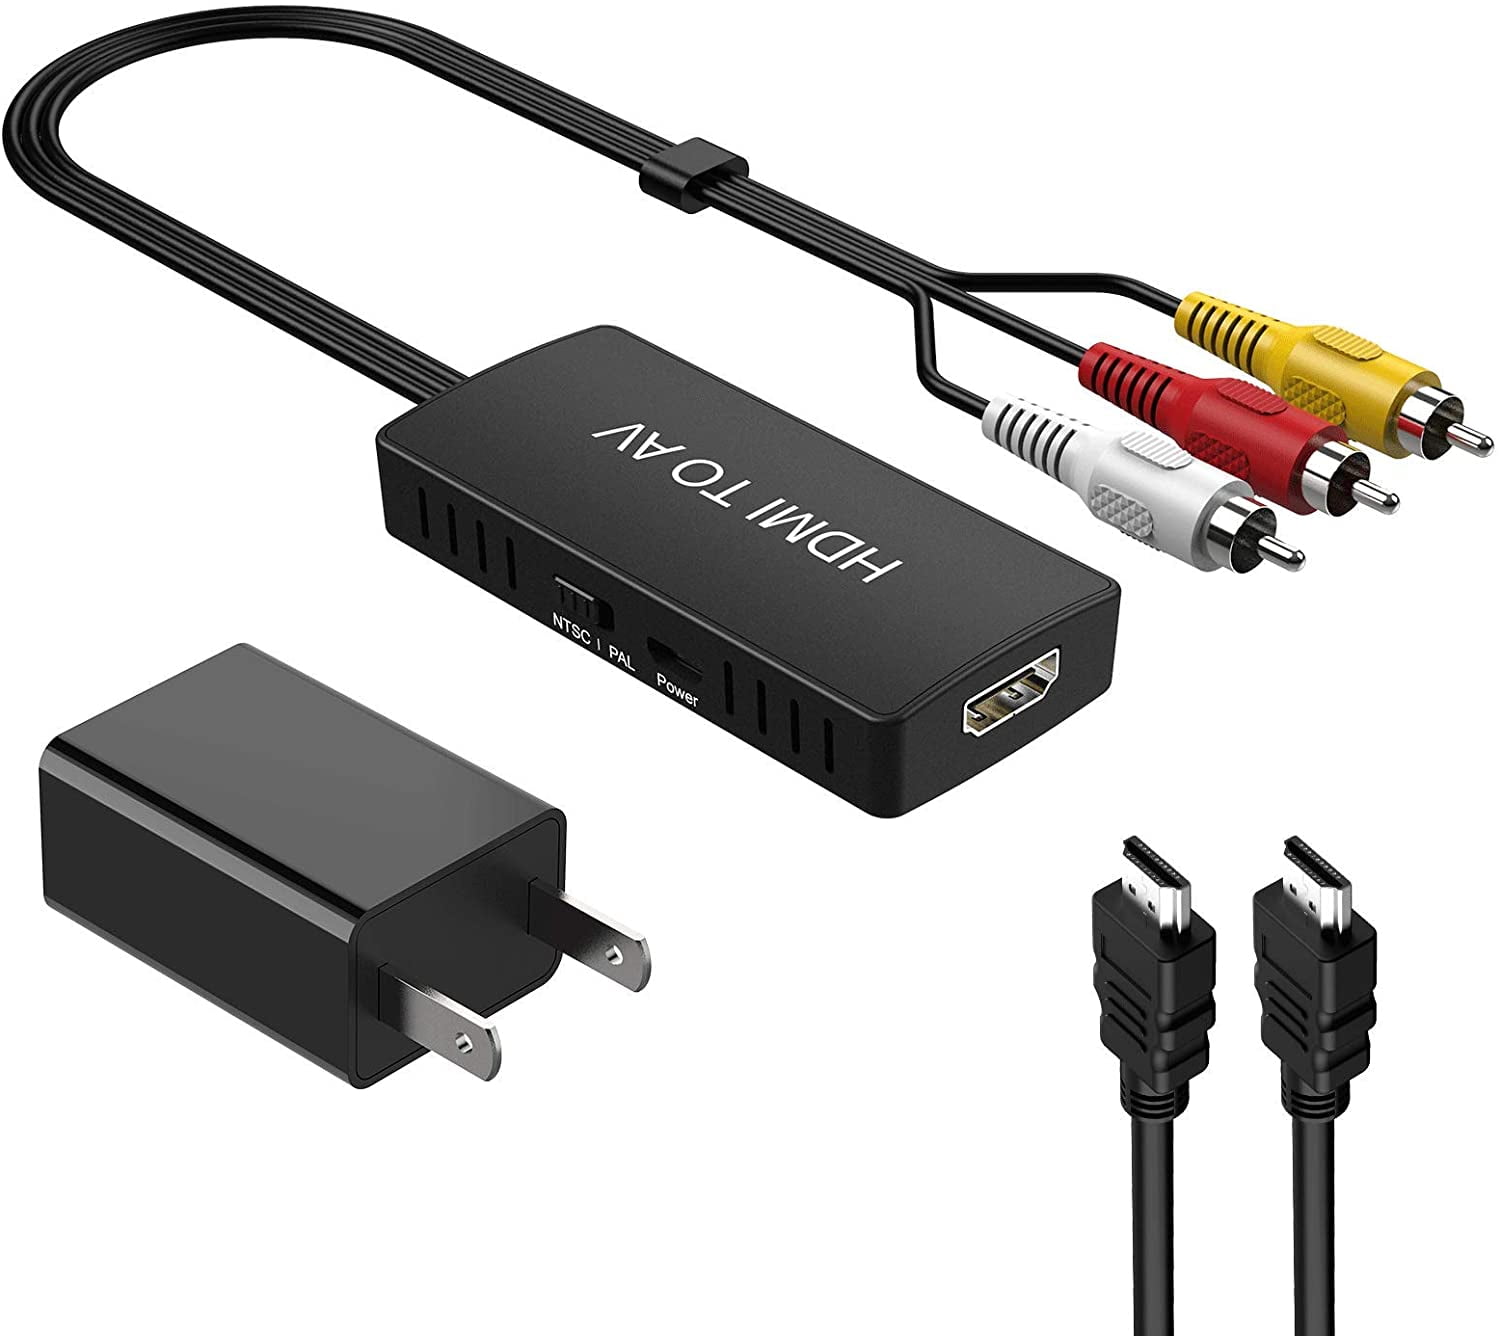 Digitech HDMI to VGA Converter with Stereo Audio Output